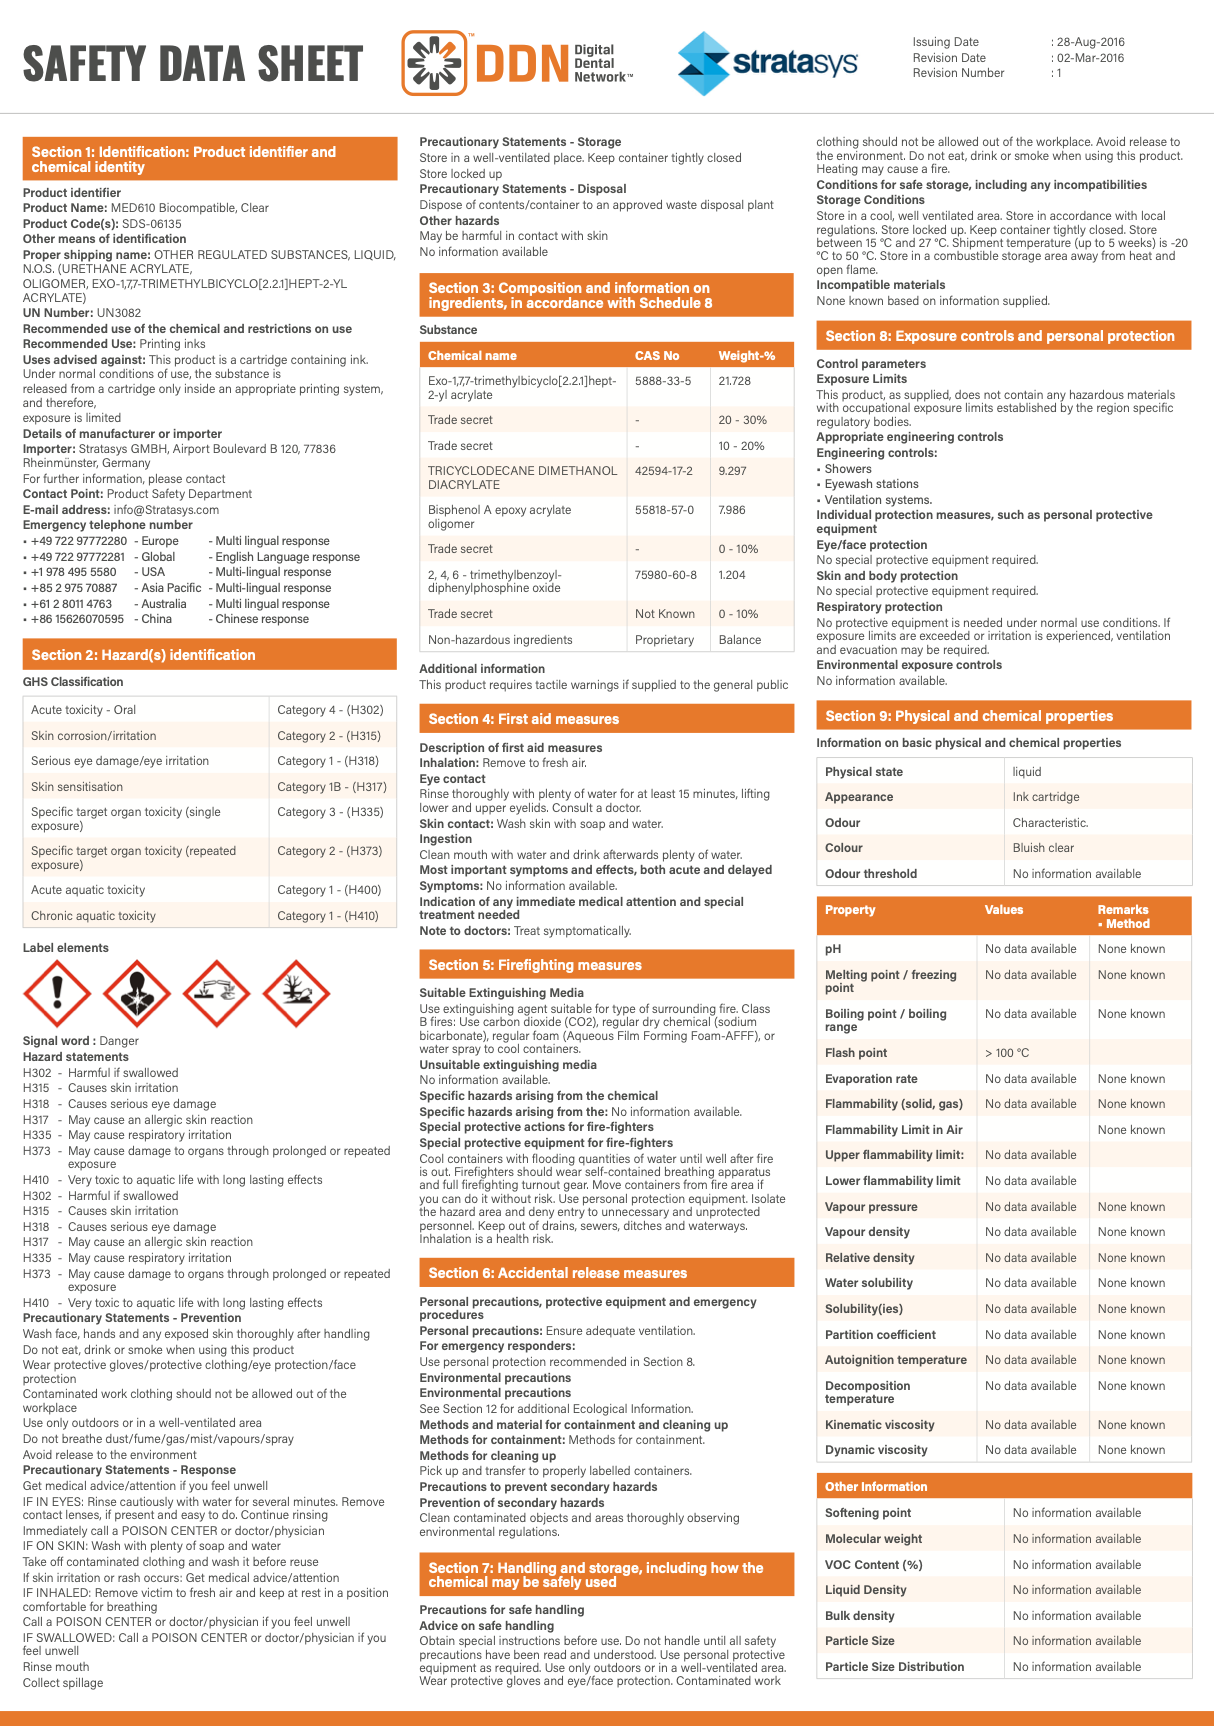 DDNGUIDE: Safety Data Sheet: SDS Object MED610 Biocompatible Clear